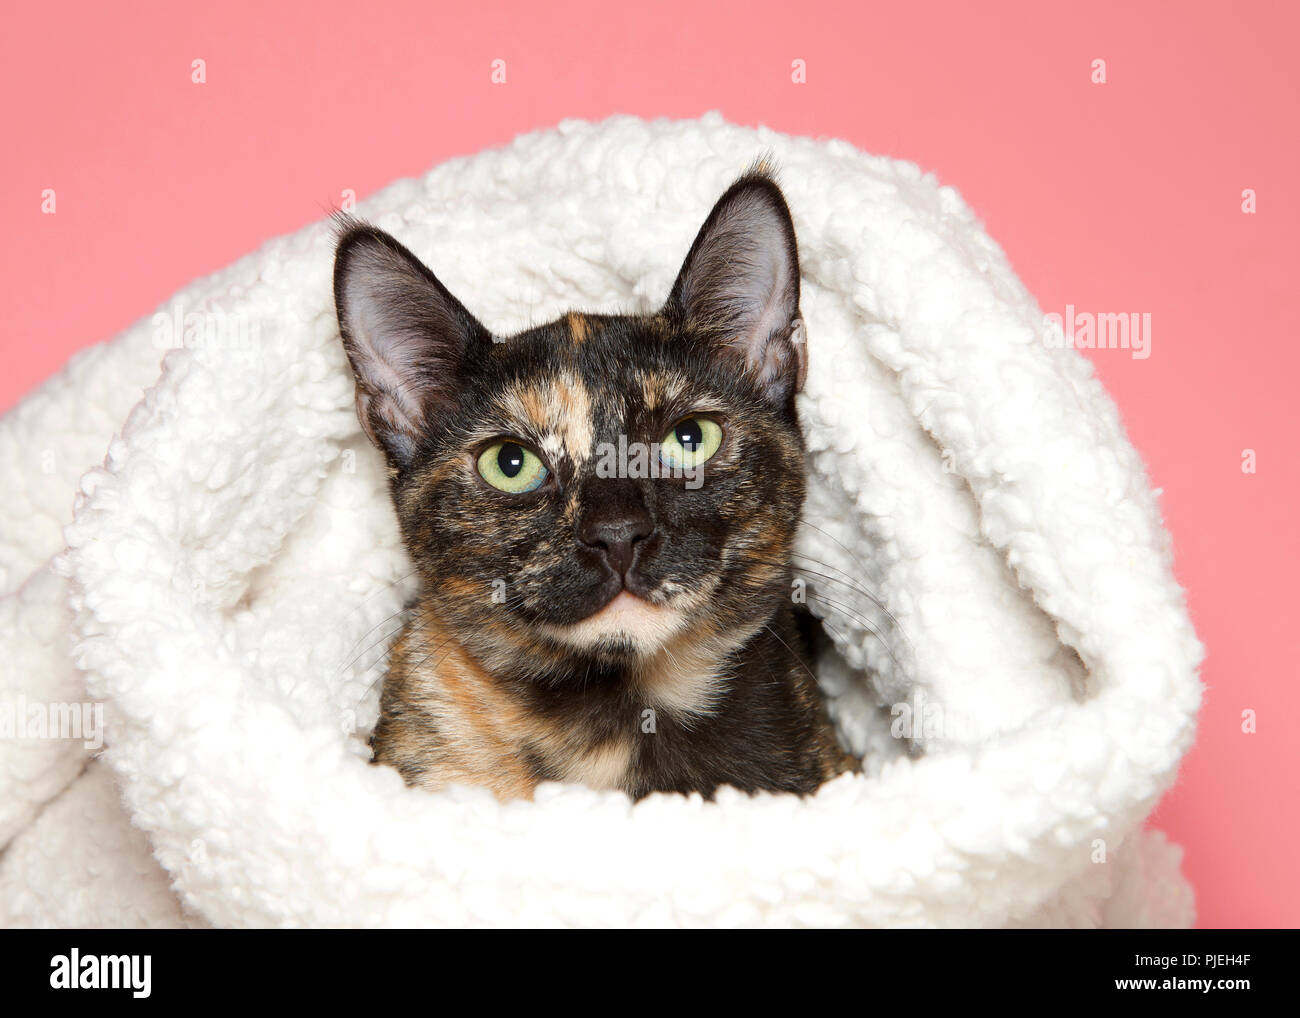 Portrait of an adorable tortie tabby kitten peaking out of a sheepskin blanket looking directly at viewer, pink background. Stock Photo